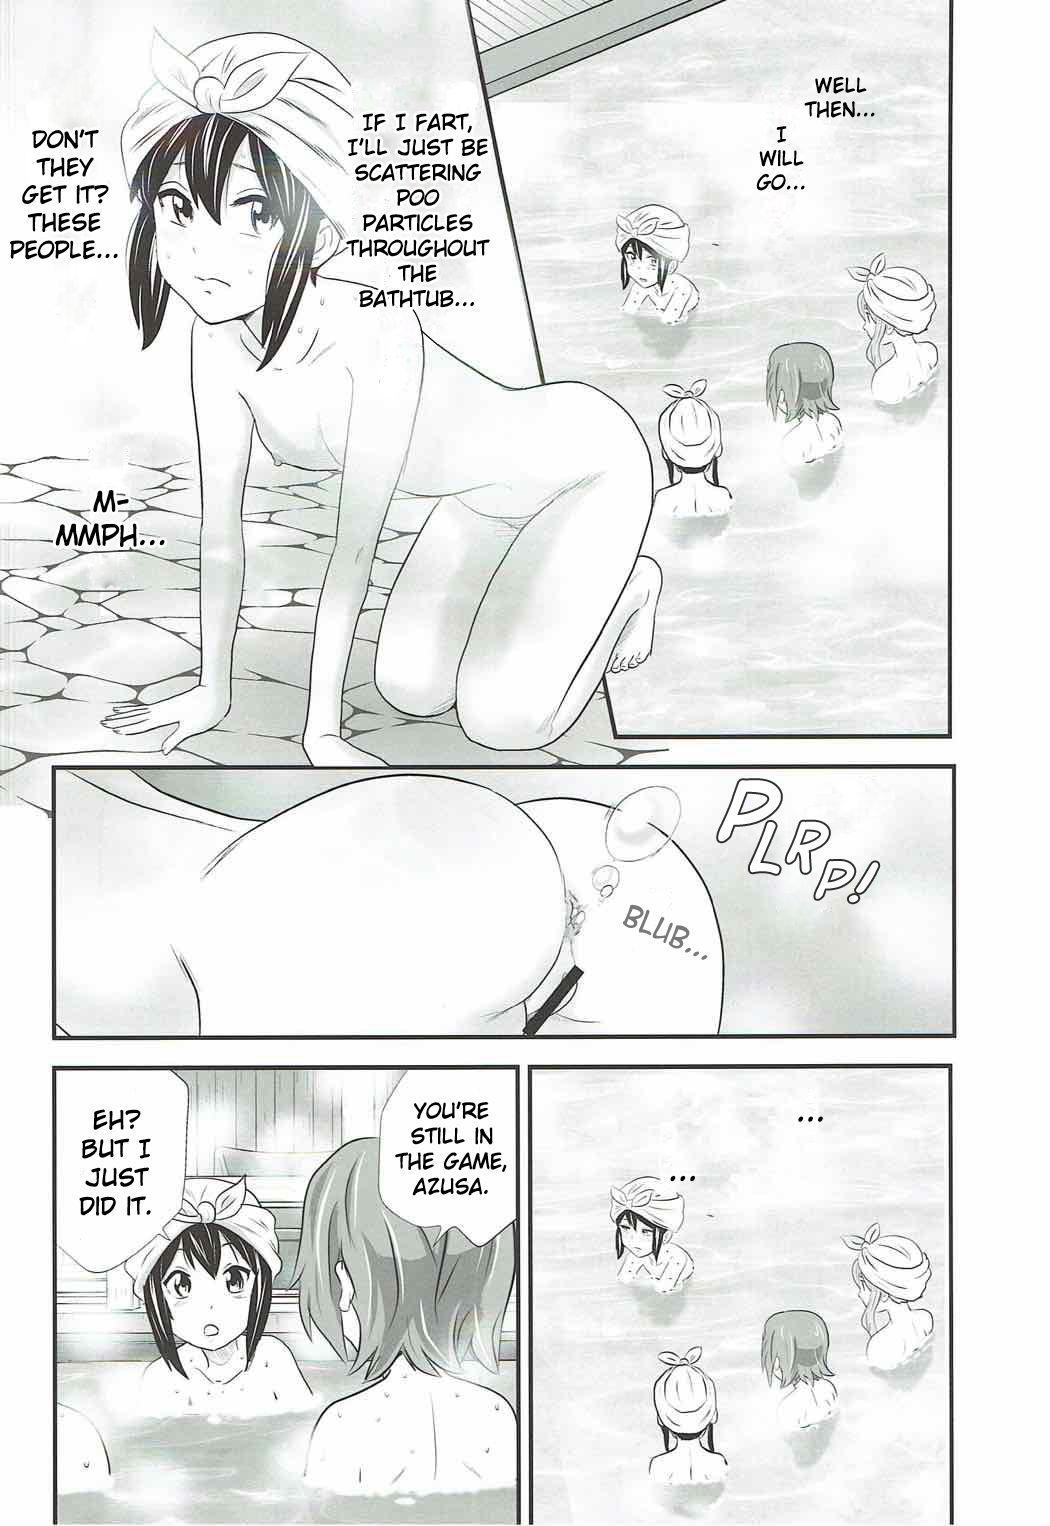 Muslim Houkago Unchi Time Final | After School Poop Time Final - K on Girl Sucking Dick - Page 7